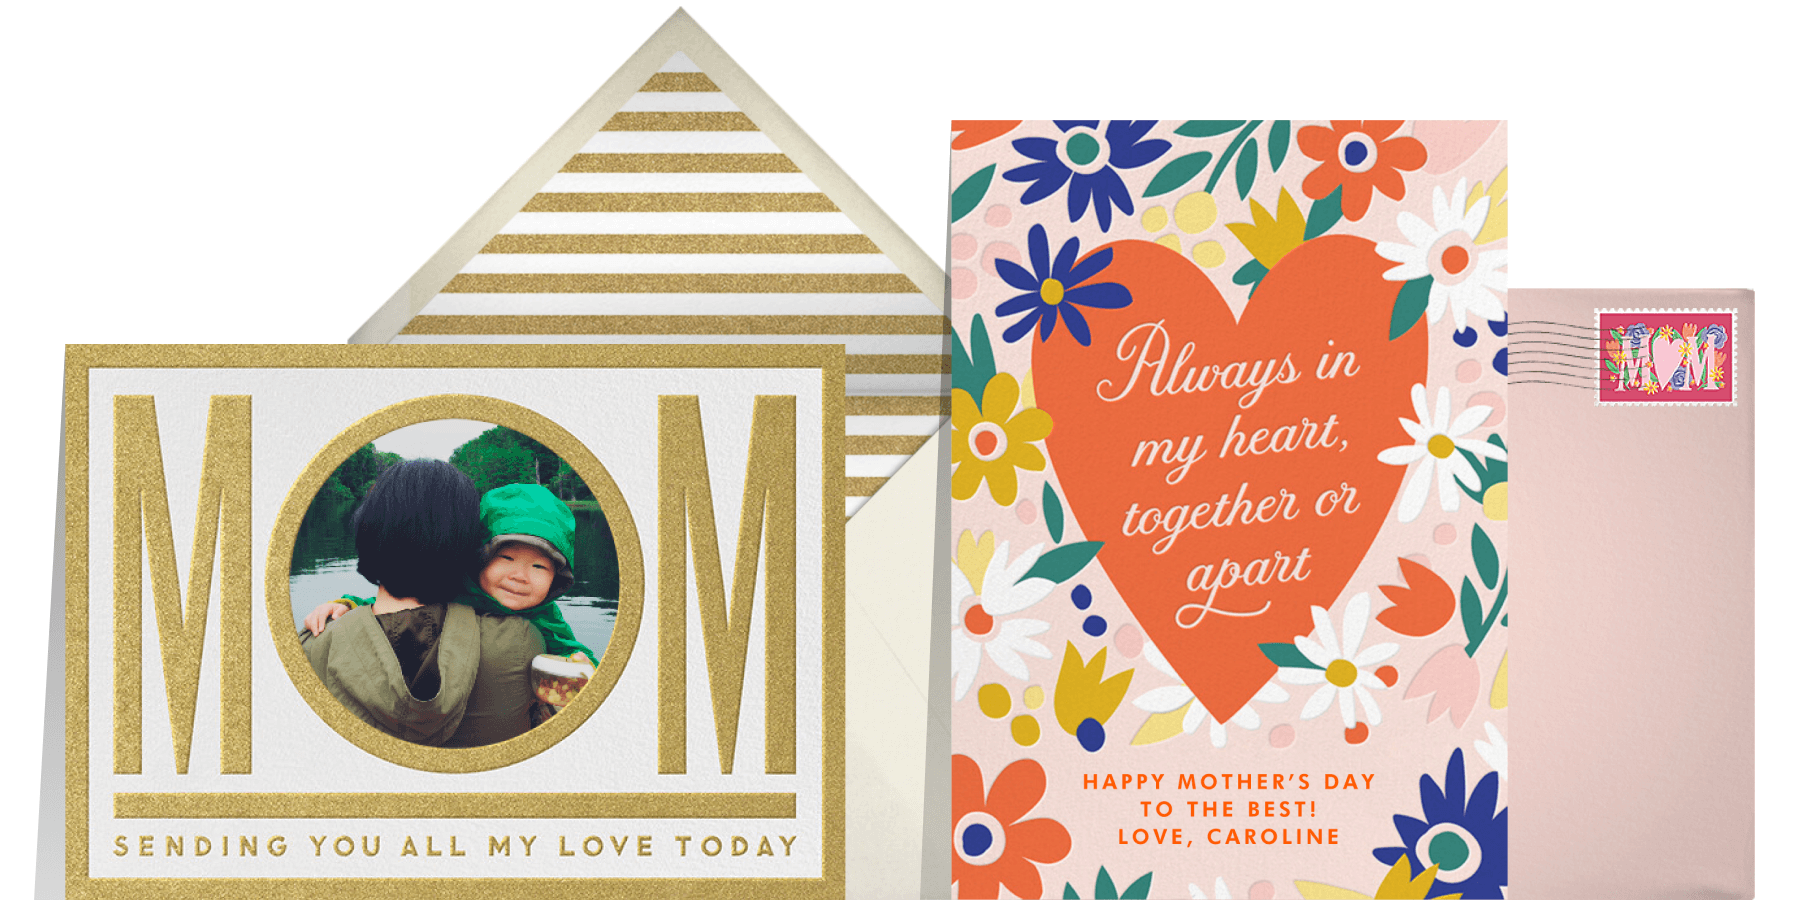 Left: A mother’s day card featuring “MOM” in large letters with room for a photo in the “O”. Right: A Mother’s Day card with a sweet sentiment in a heart surrounded by flowers.